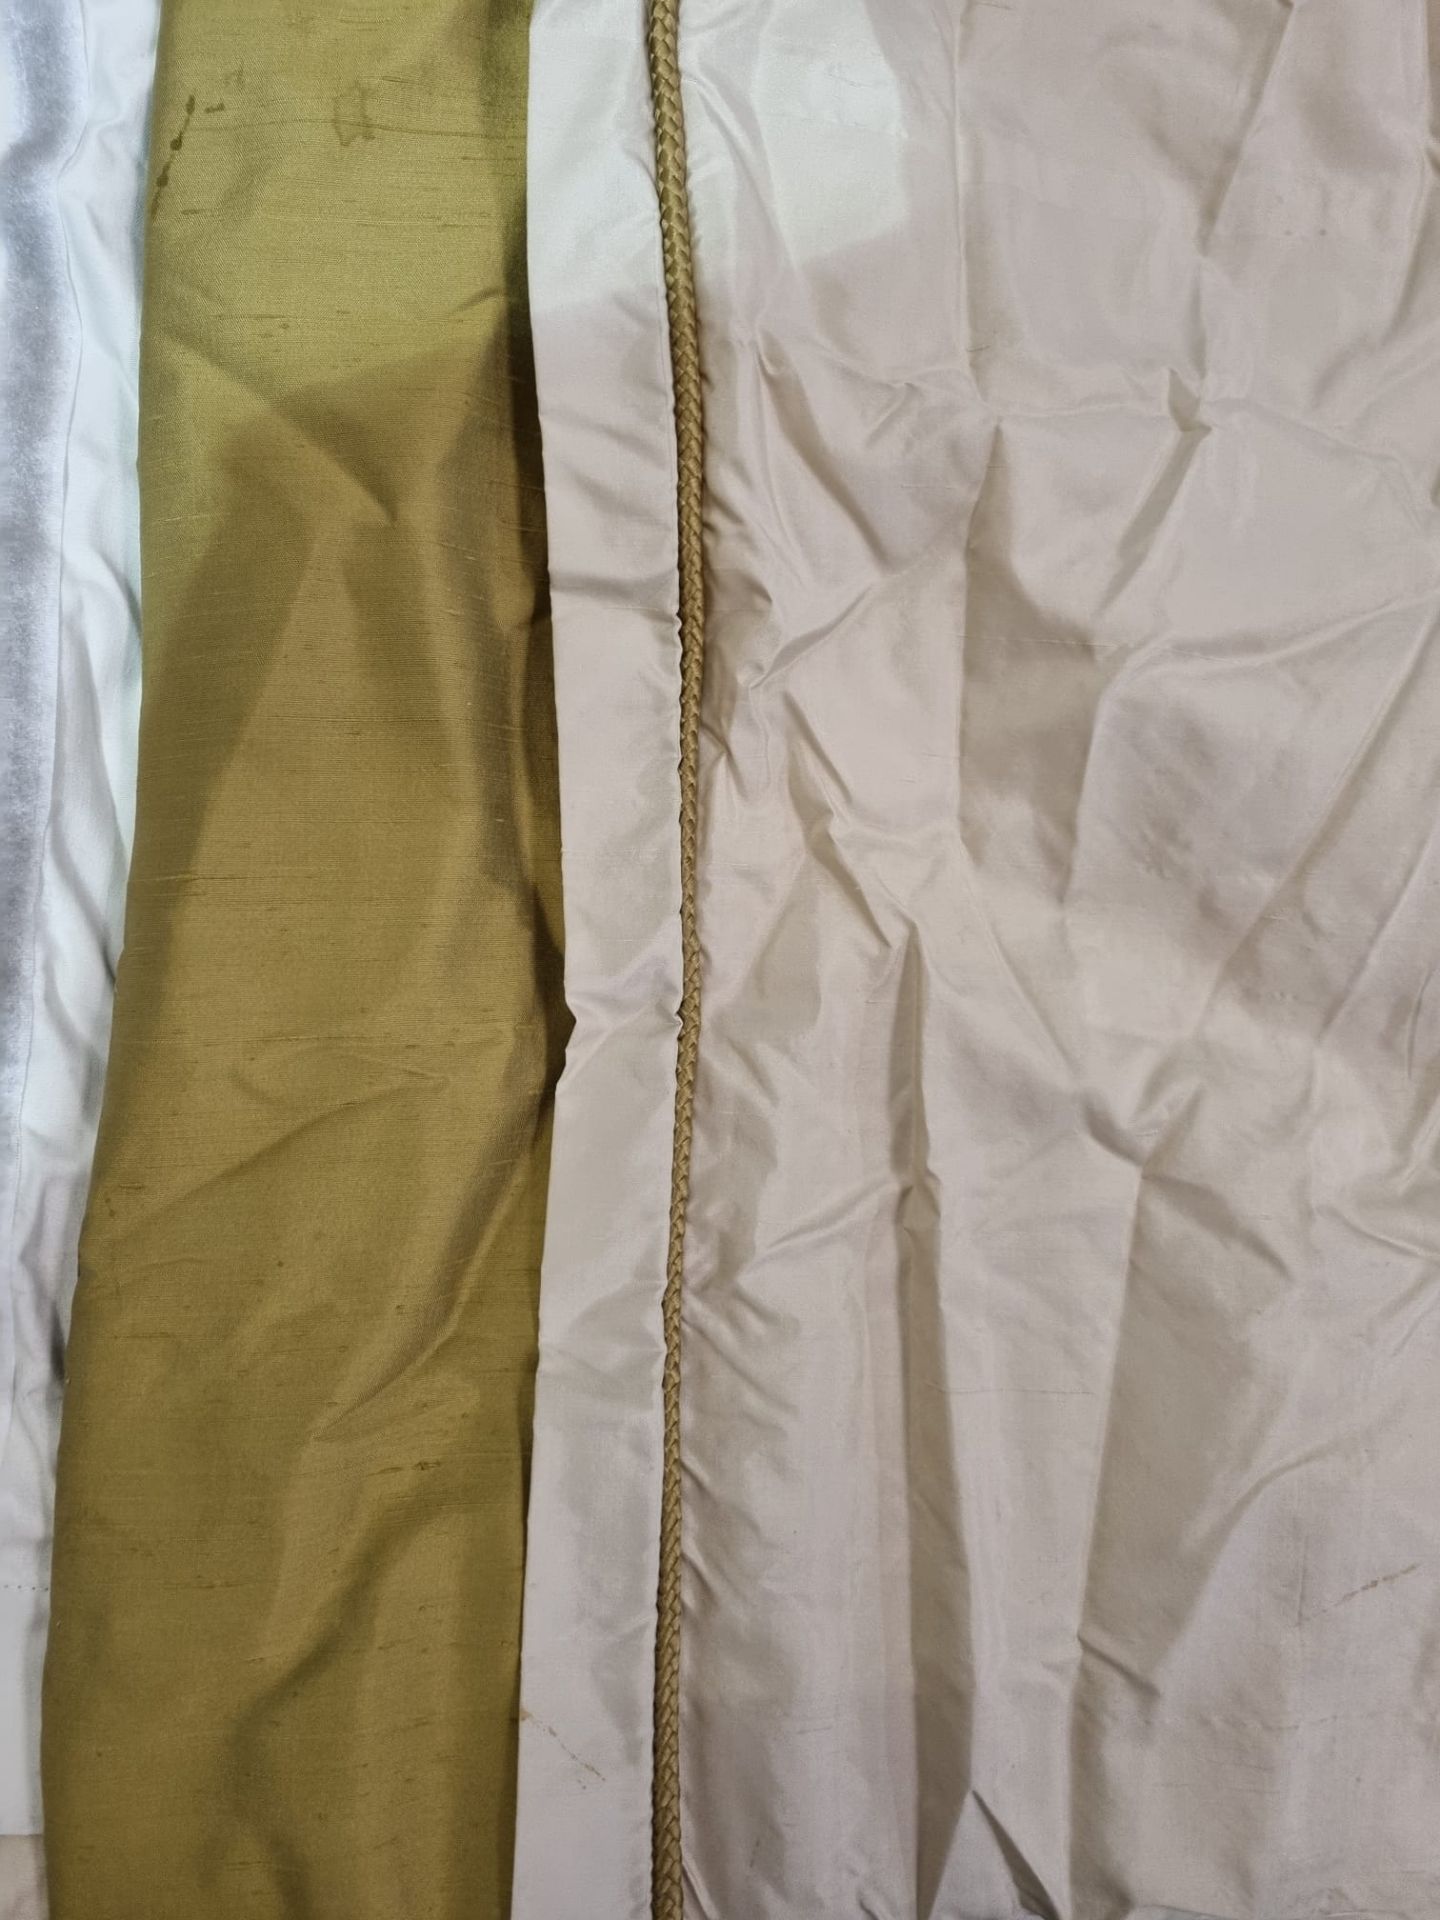 A Pair Of Silk Drapes With Green Stripe Gold Piping 288 x 250cm (Dorch 39) - Image 3 of 4